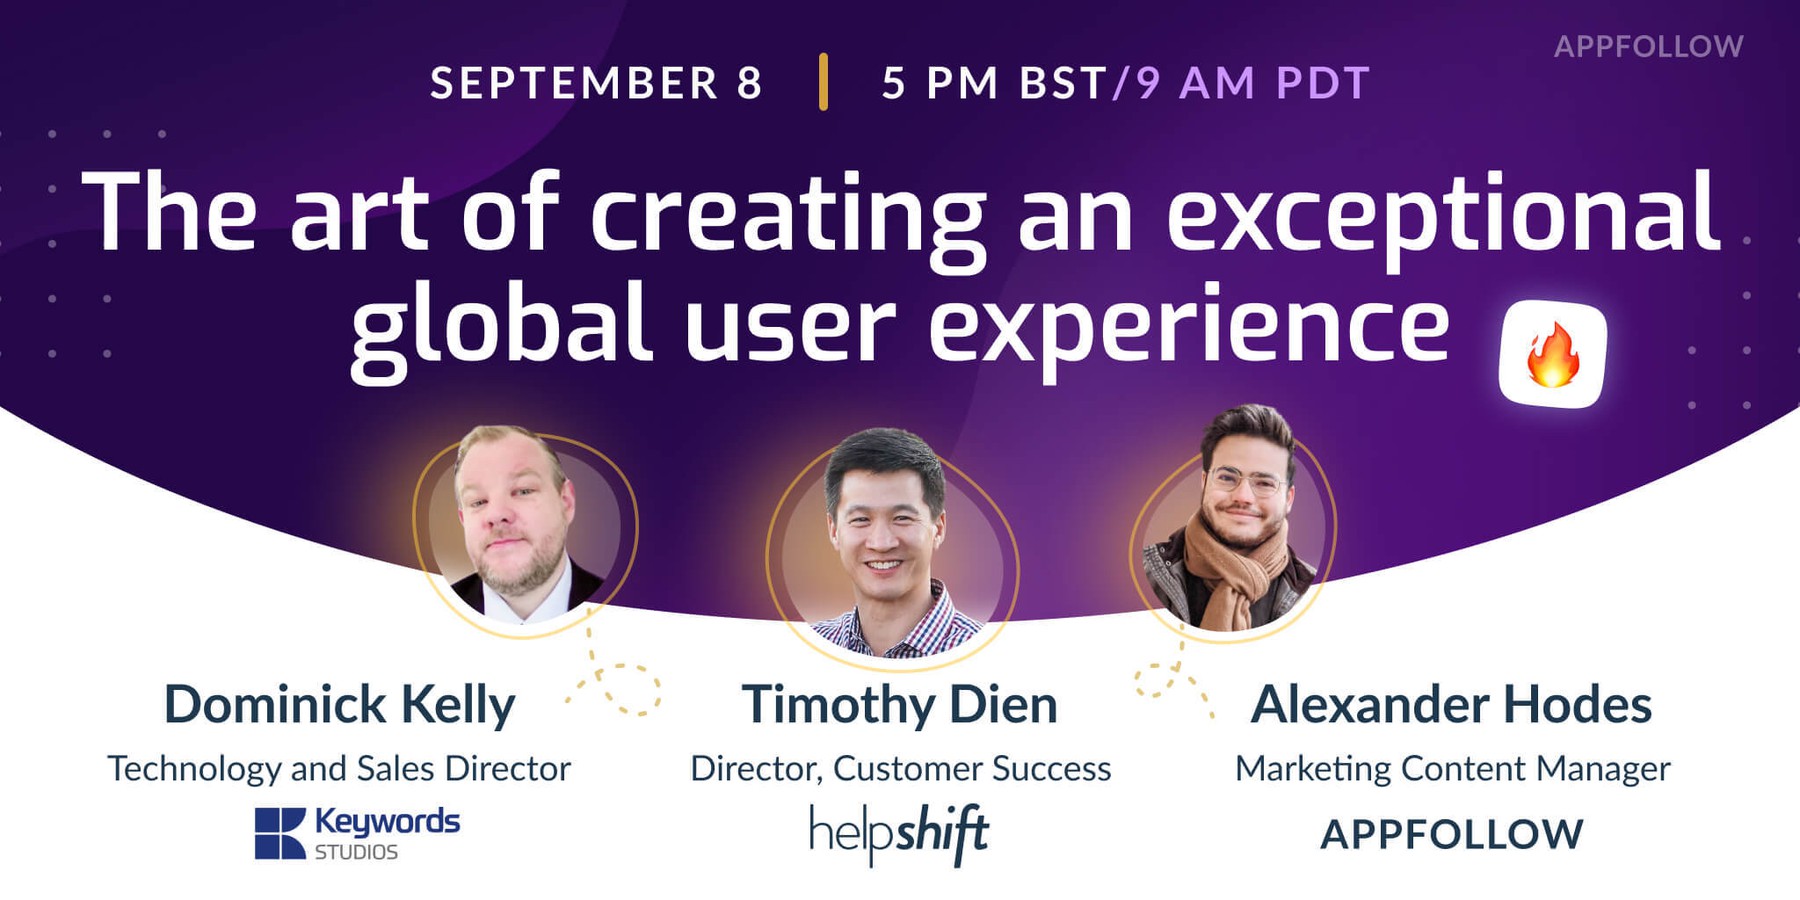 The art of creating an exceptional global user experience